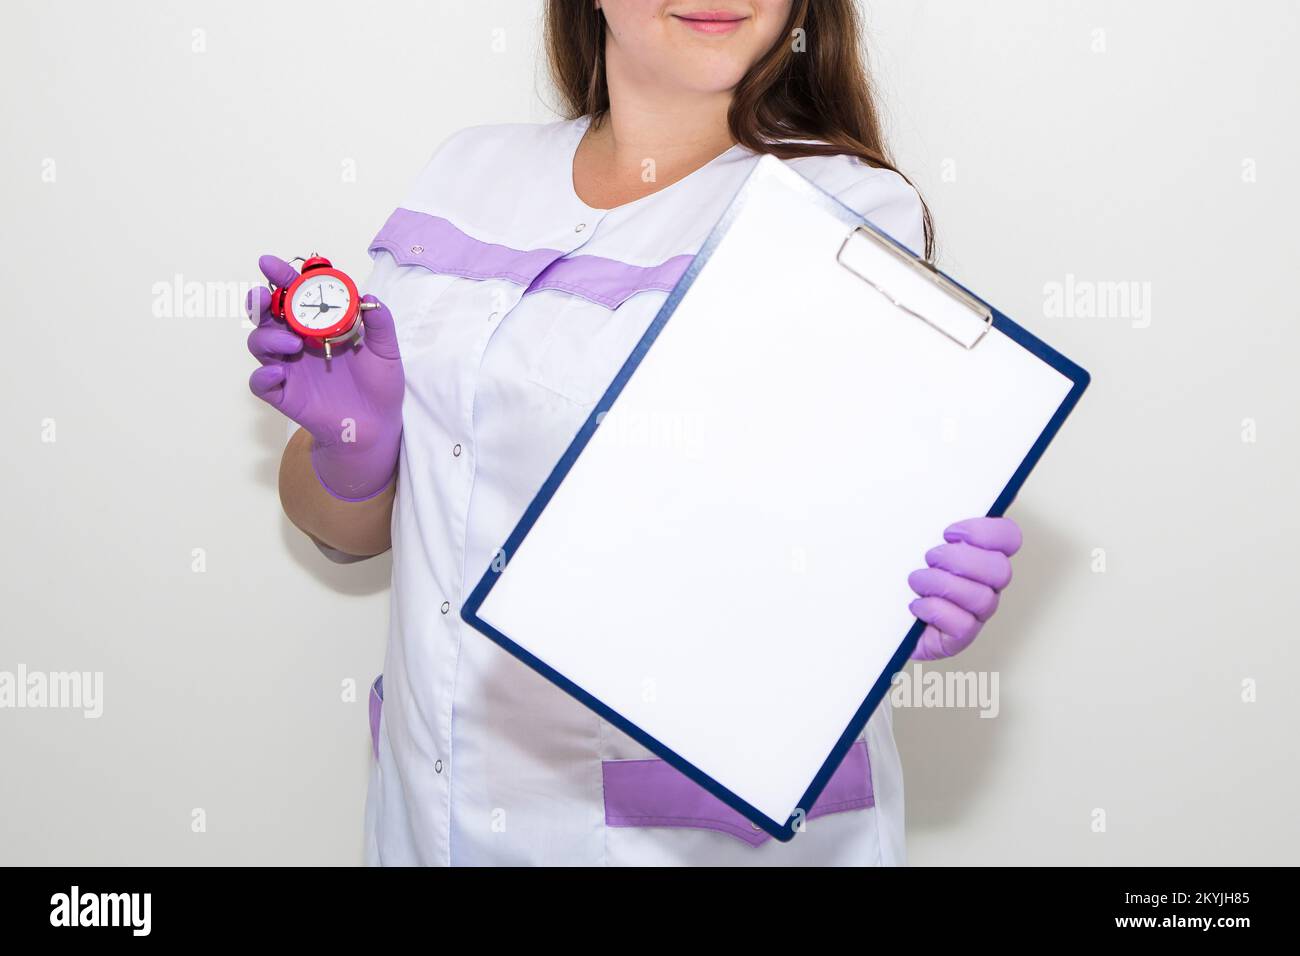 A woman points with a finger at a tablet for paper in her hands Stock Photo